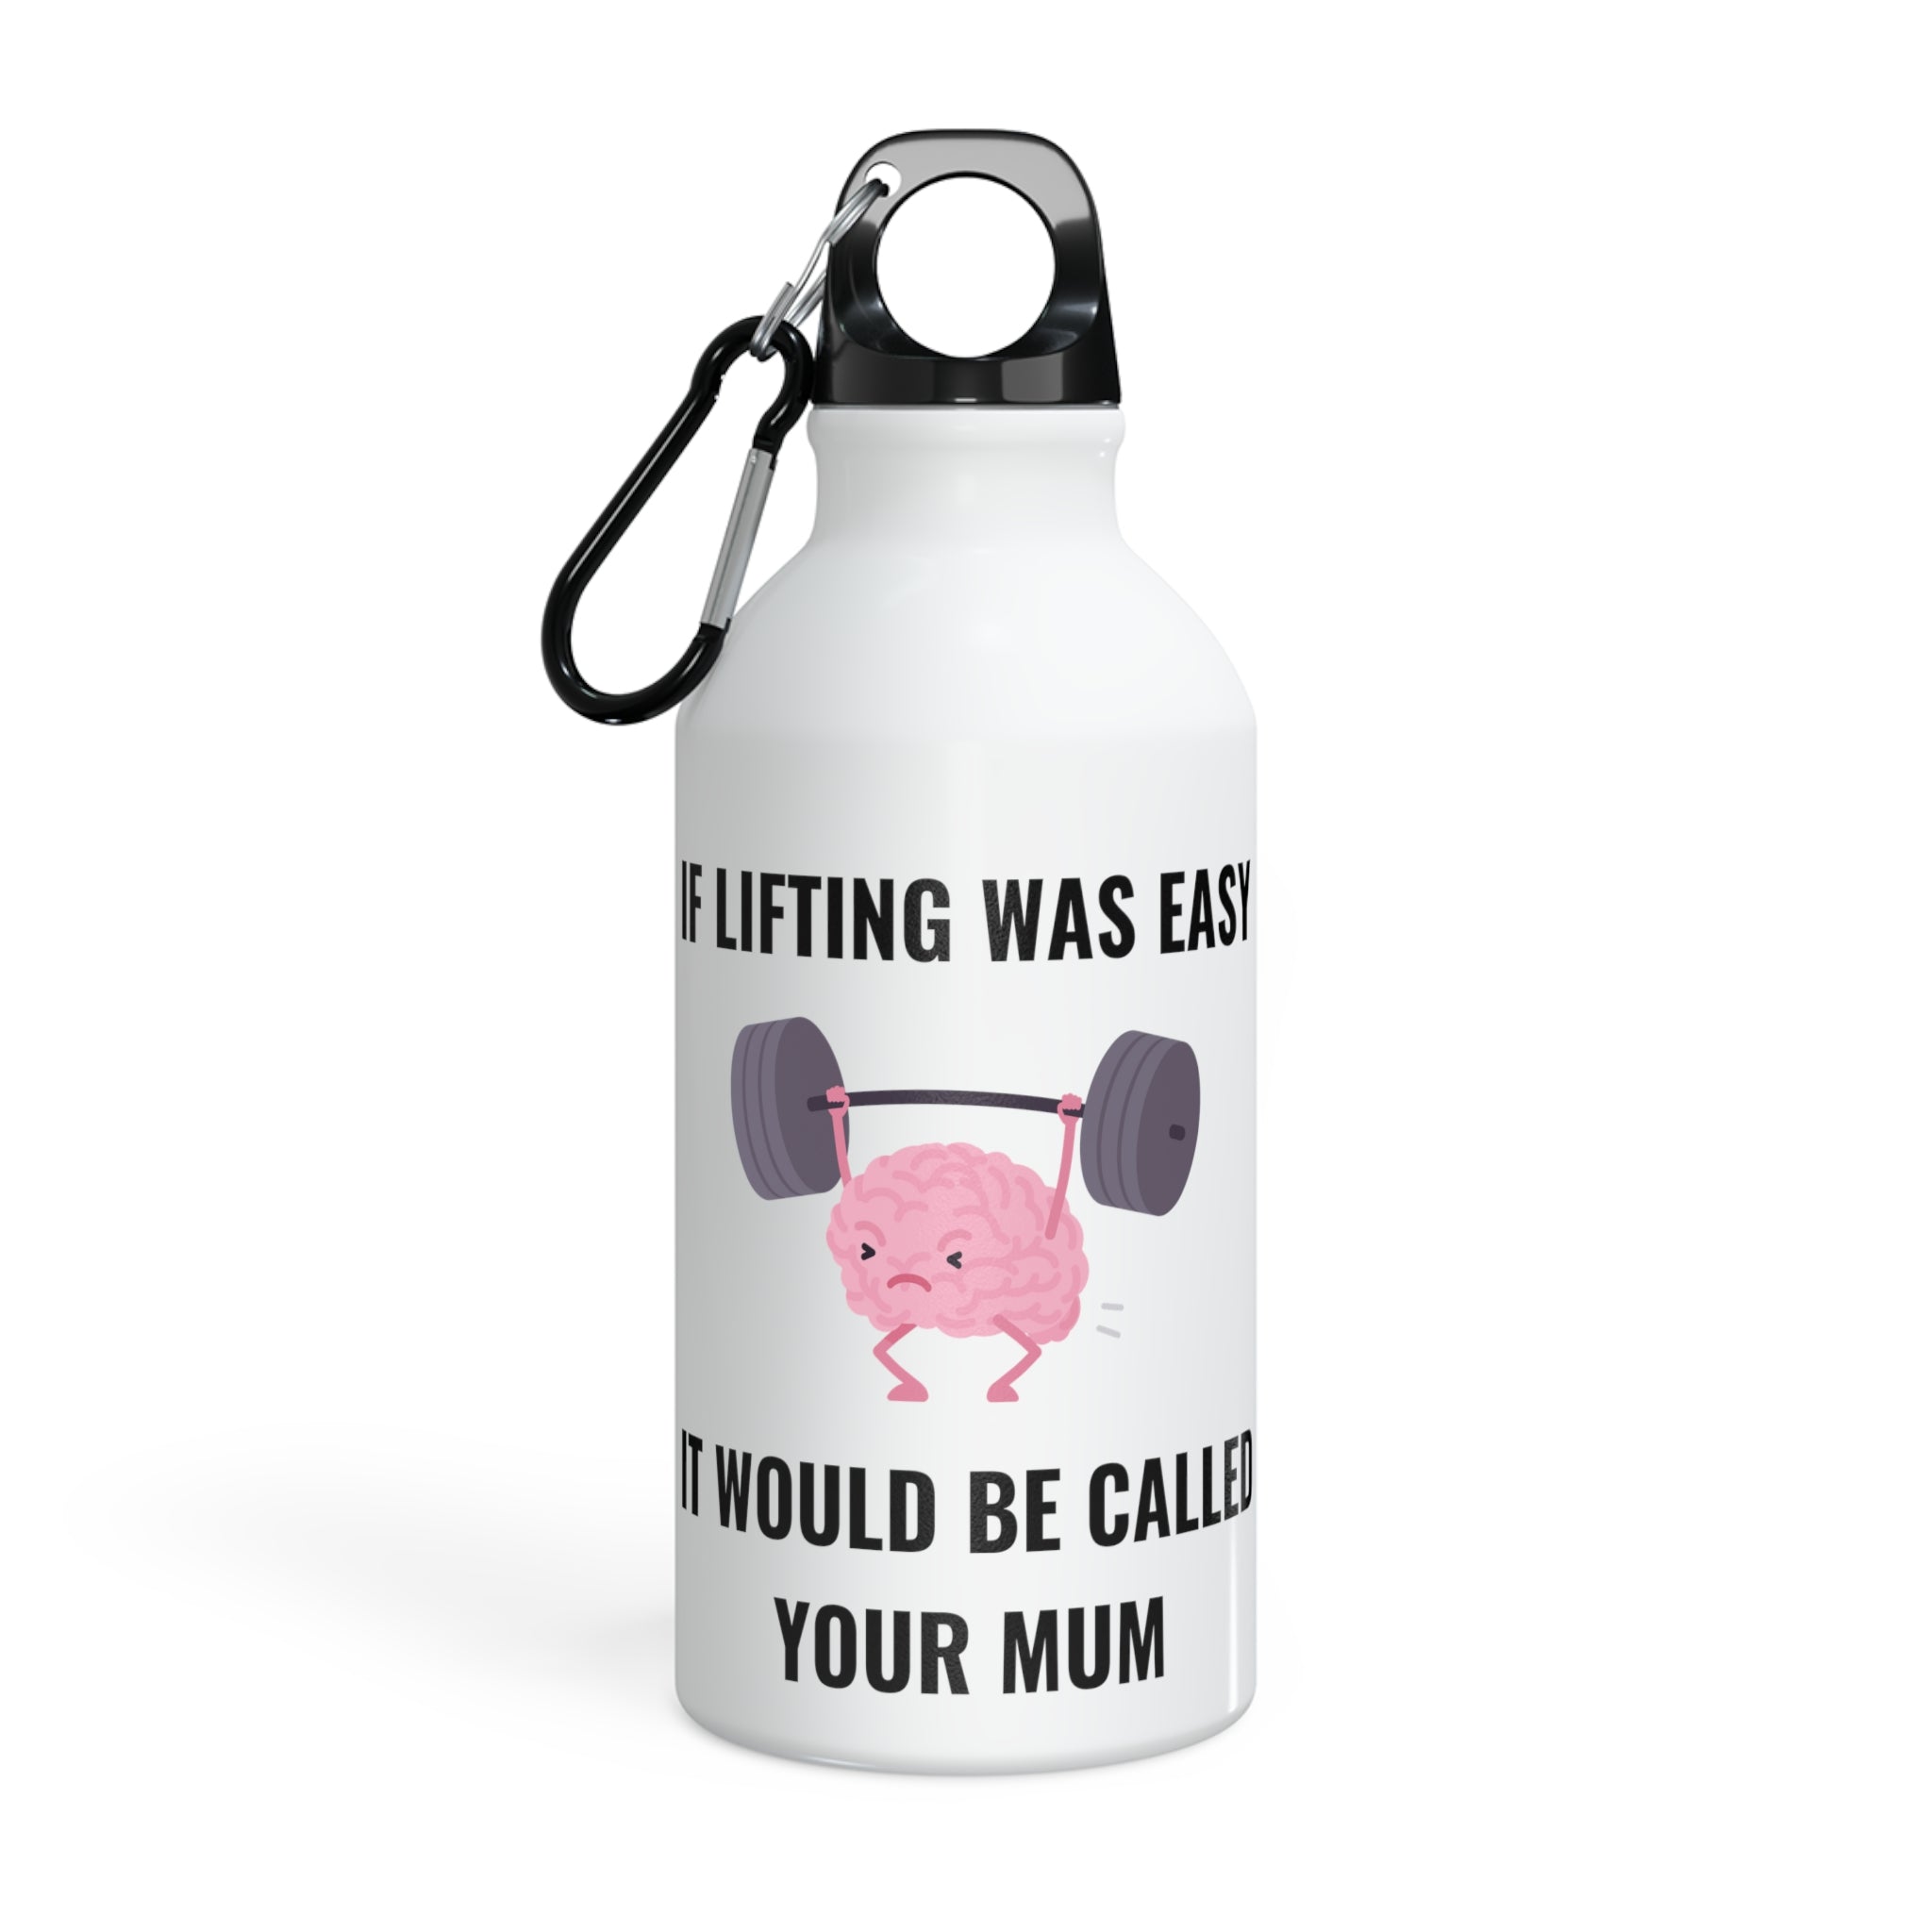 Funny Gym Gifts Men Funny Bodybuilding Fitness Gym' Water Bottle